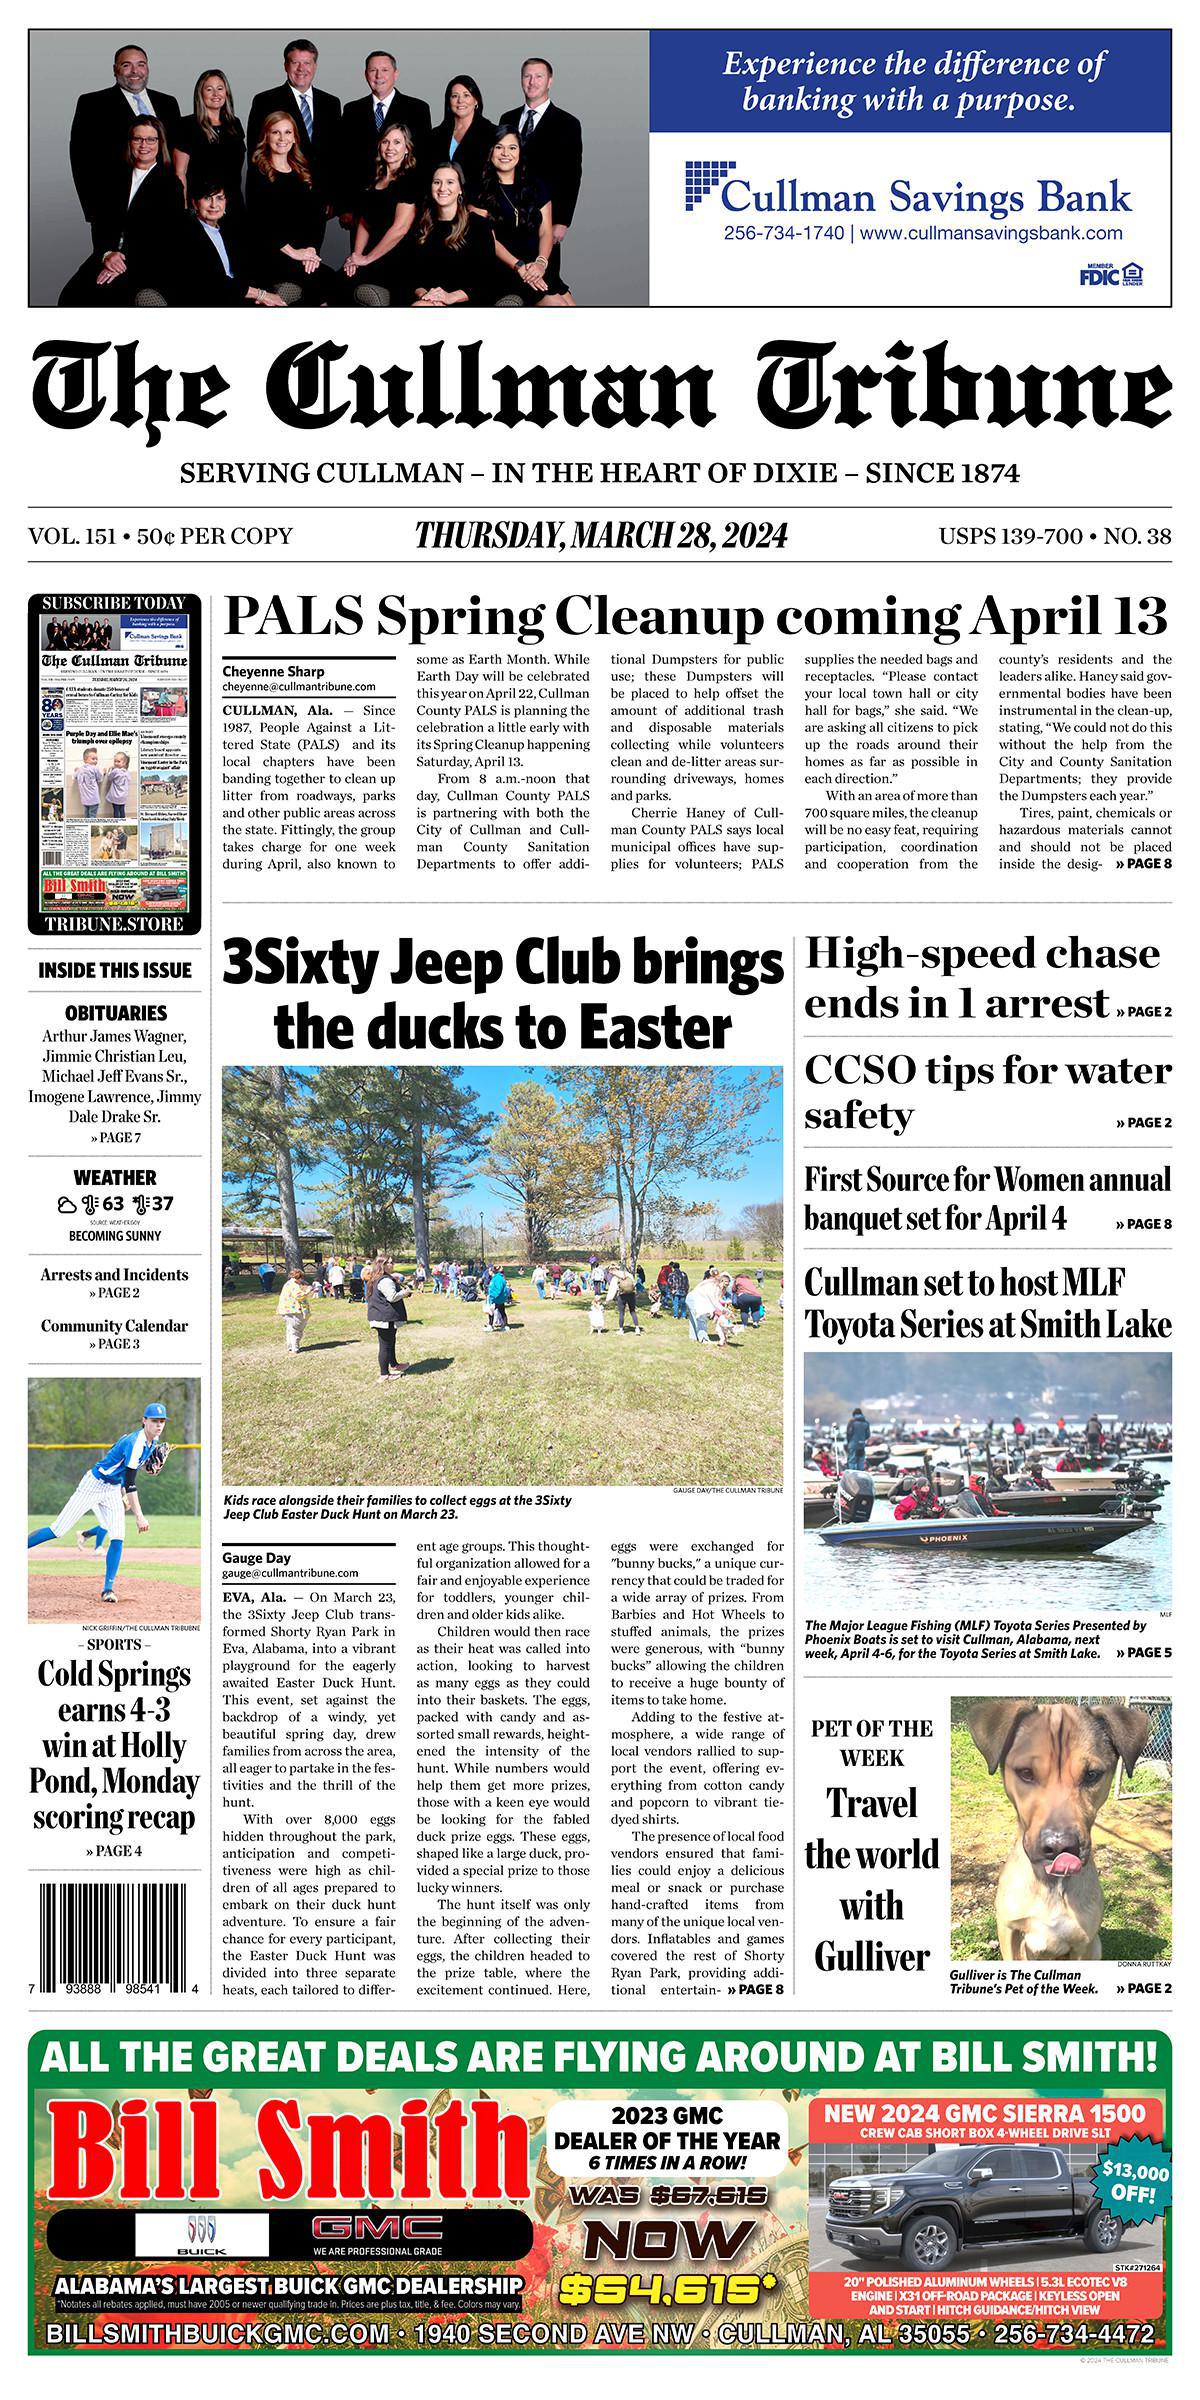 Good Morning Cullman! The 03-28-2024 edition of the Cullman Tribune is now ready to view.